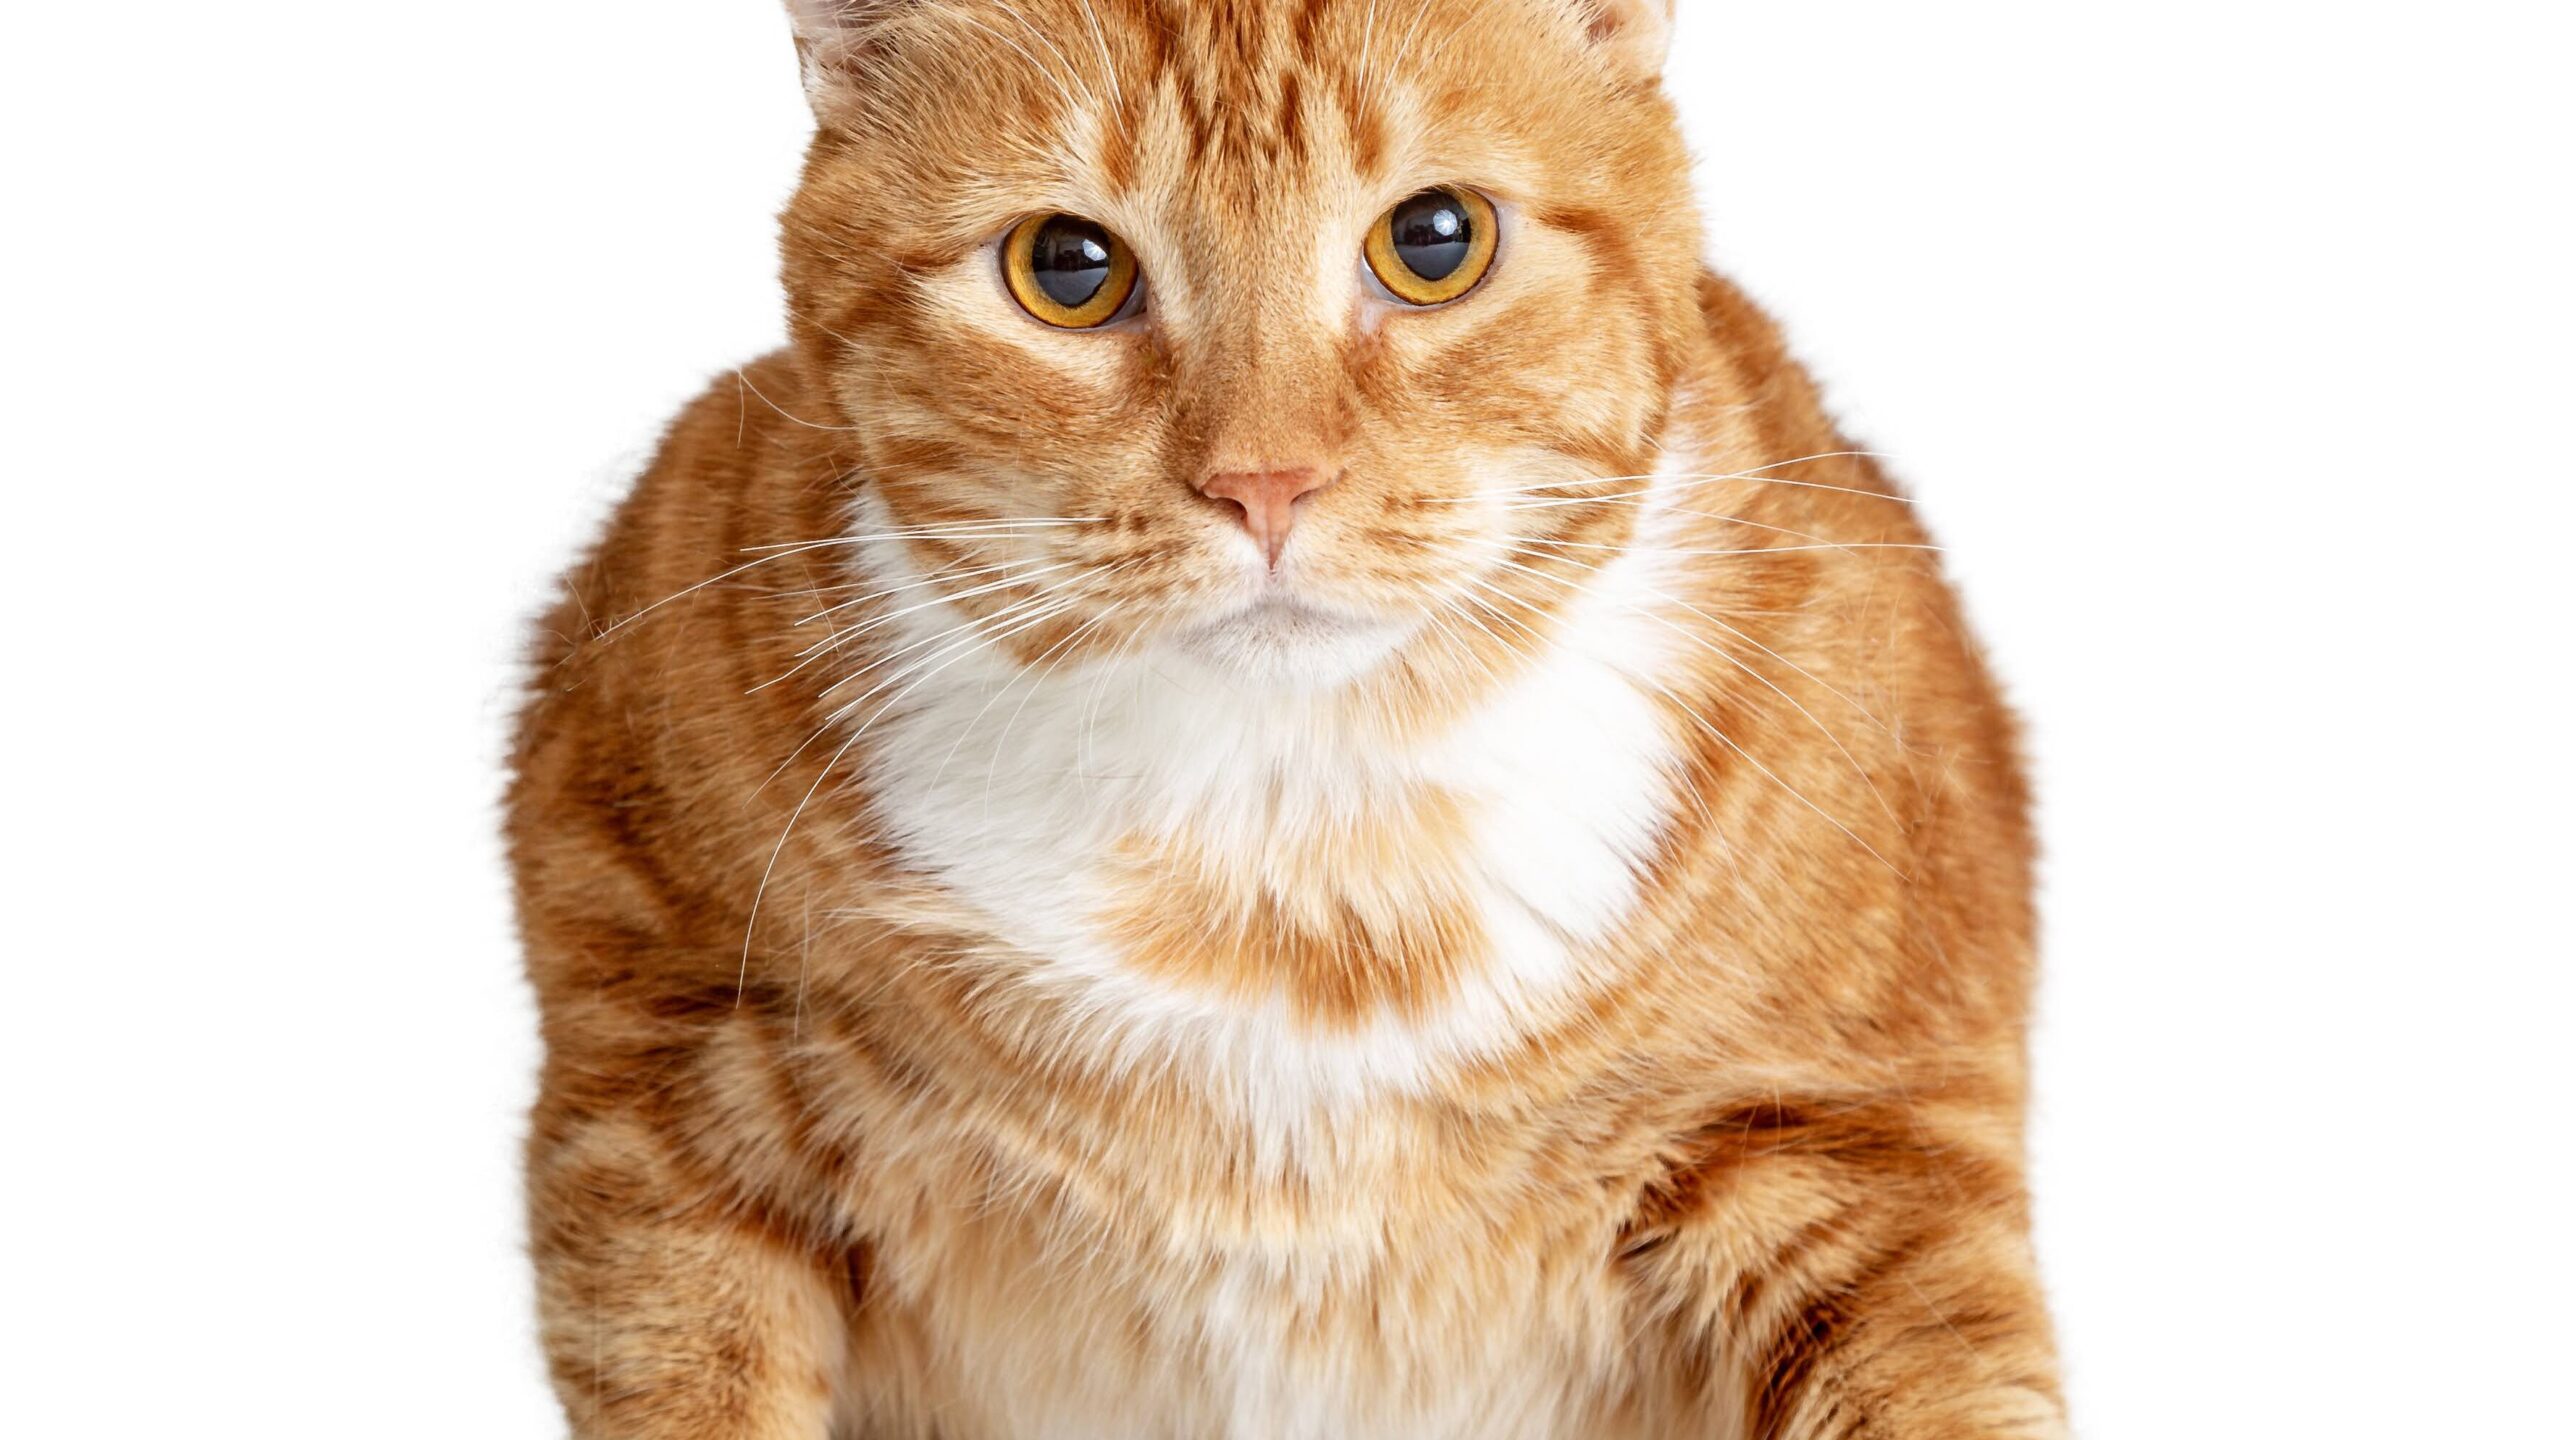 Overweight fat orange tabby cat sitting looking at camera. Isolated on white.